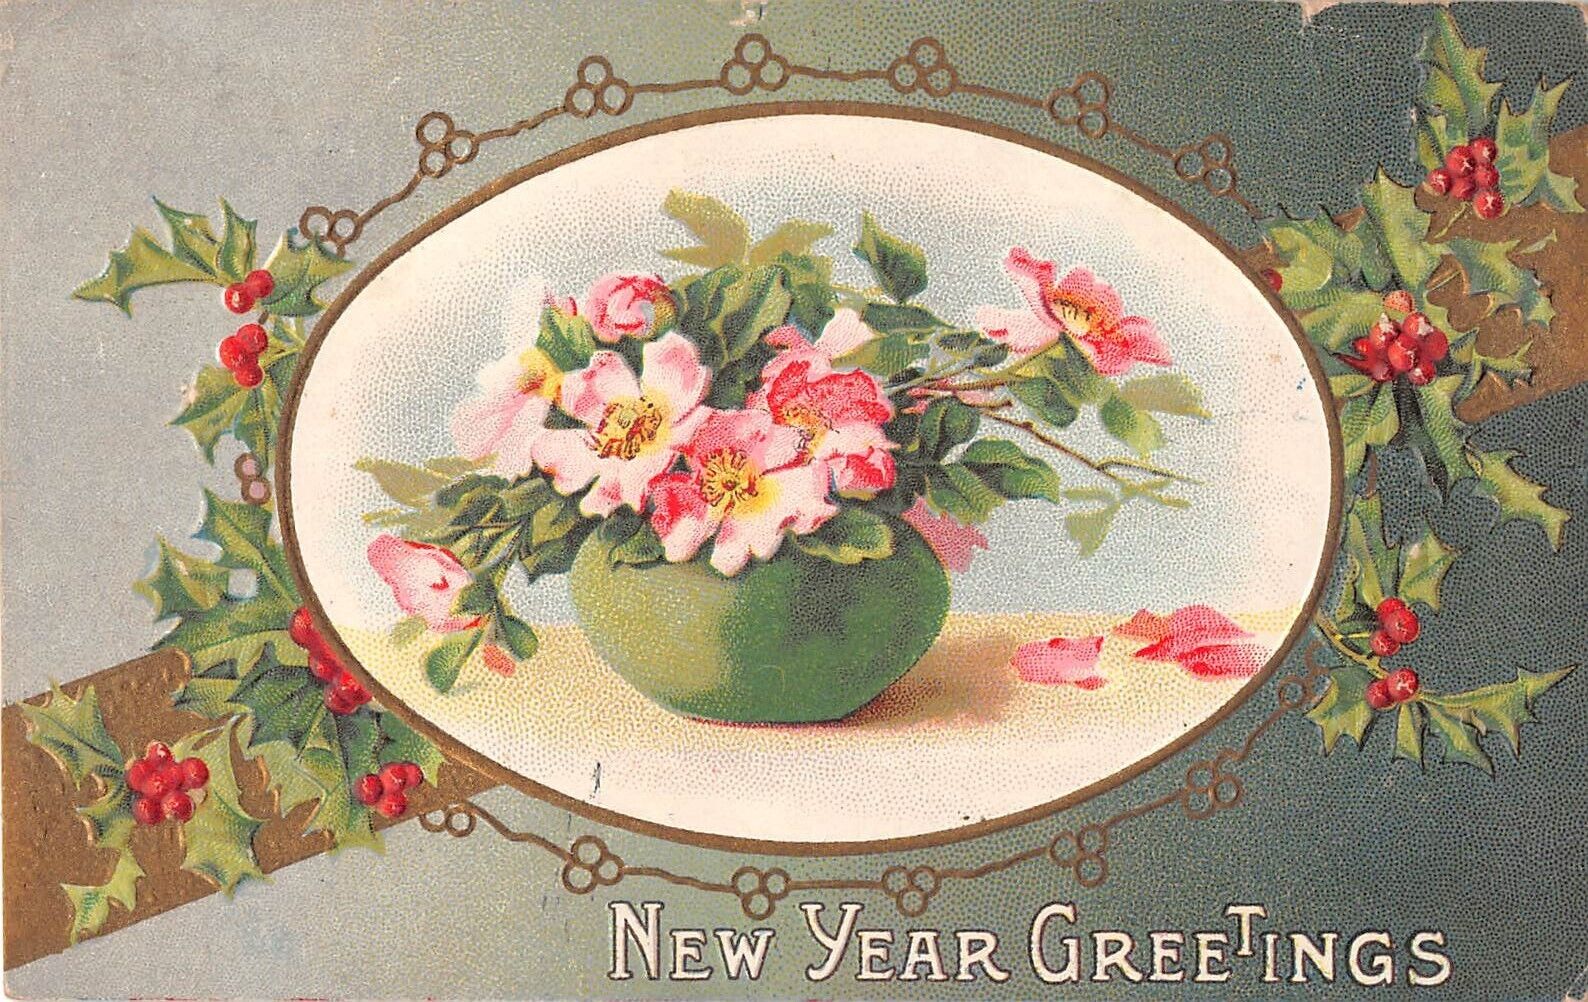 1913 New Year Postcard of Holly by Vase of Pretty Pink Wild Roses